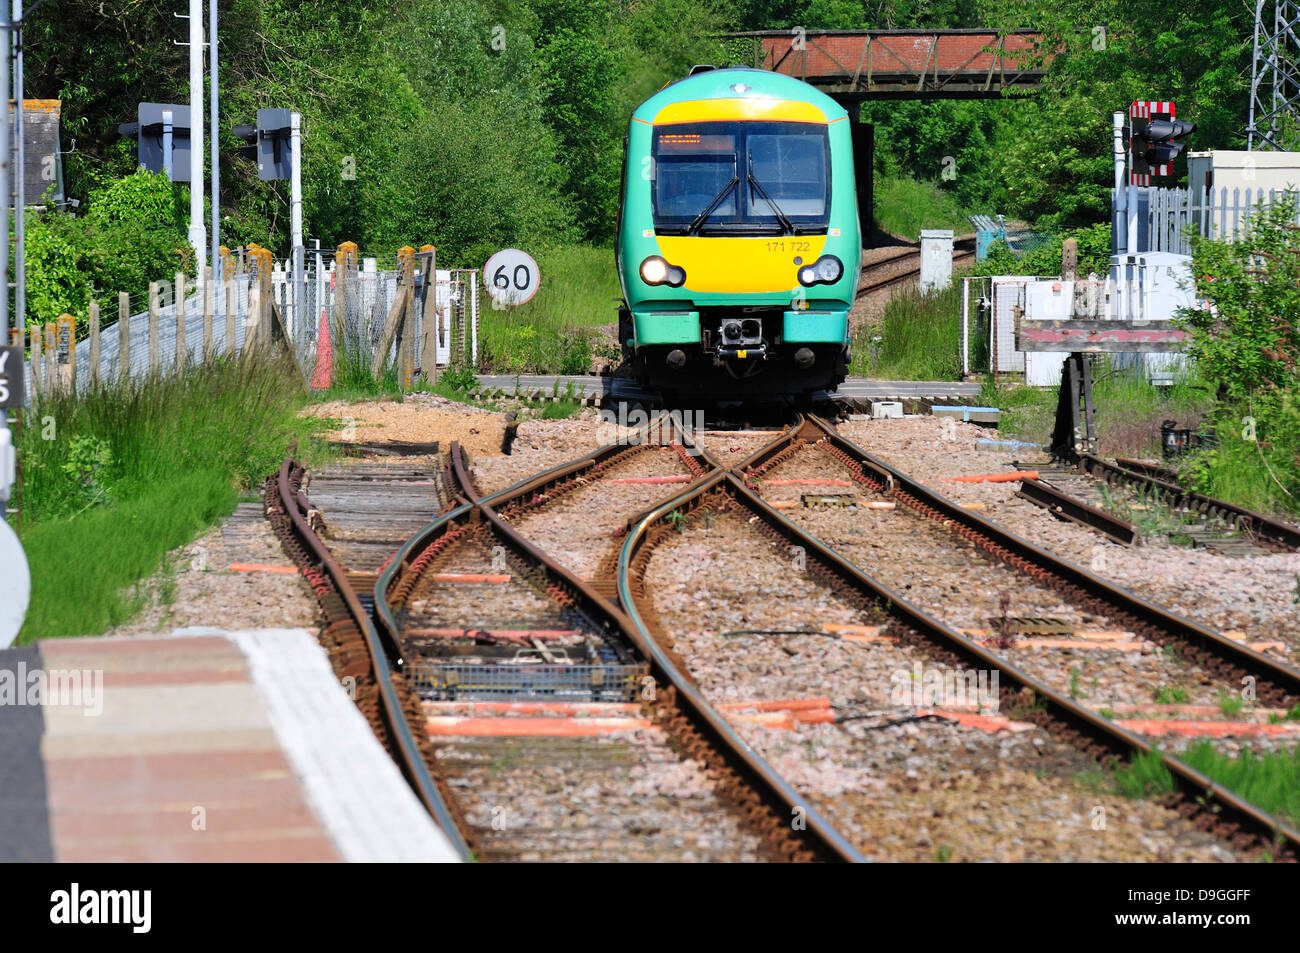 Rye, East Sussex, England, UK. 'Southern' train entering station (171 class Turbostar DMU - Diesel Multiple Unit) Stock Photo